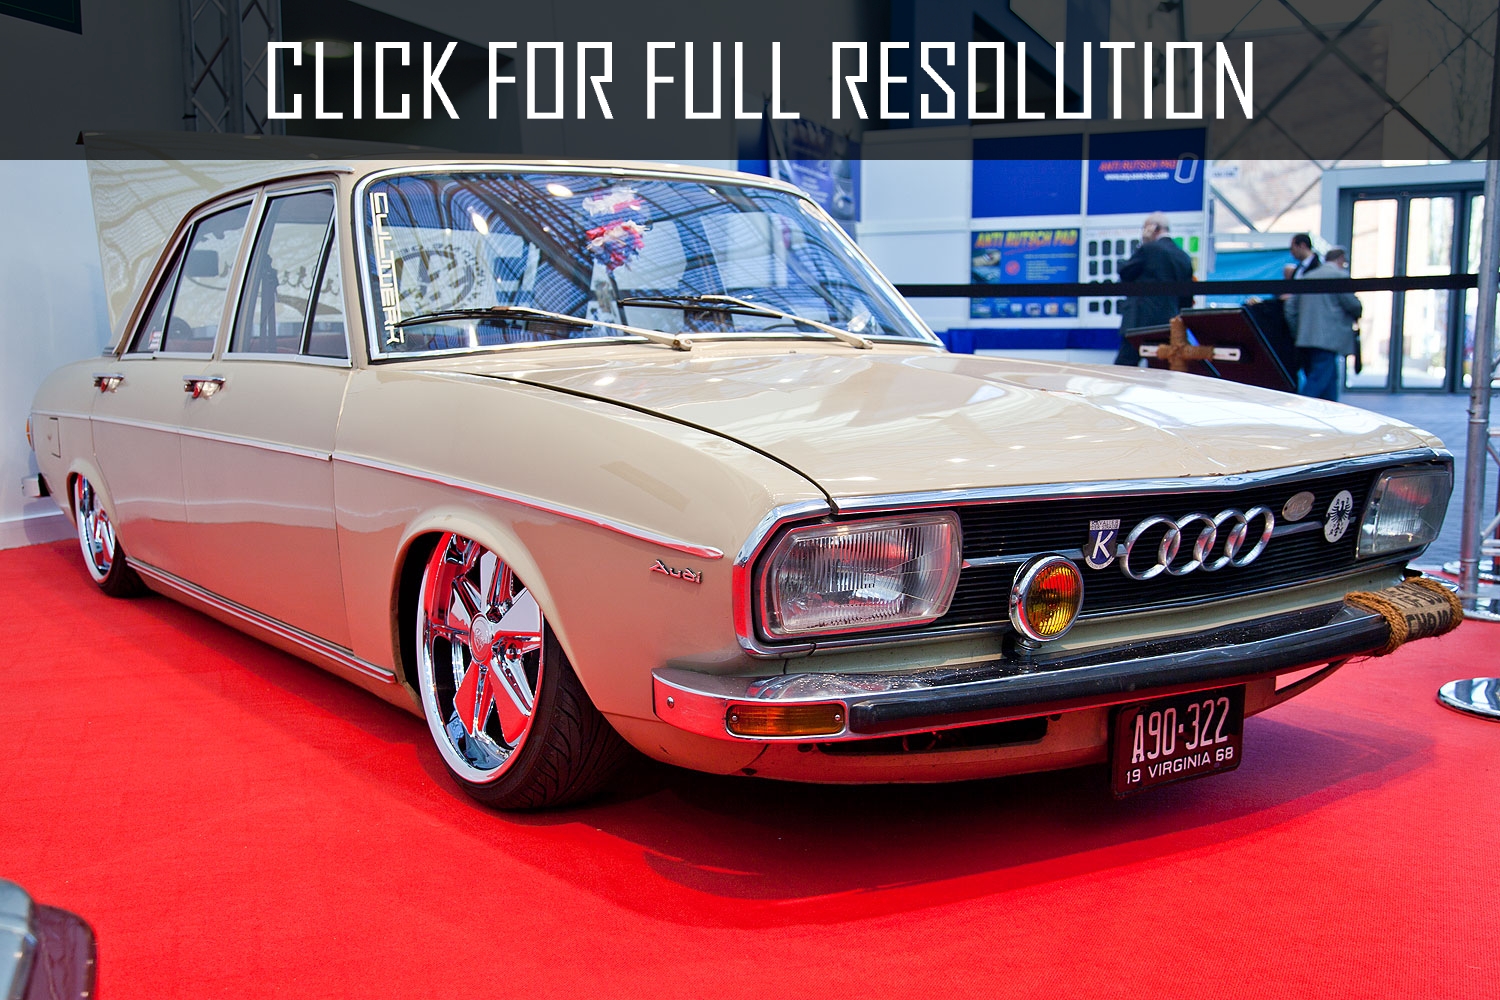 Audi 100 Ls 1974 - amazing photo gallery, some information ...